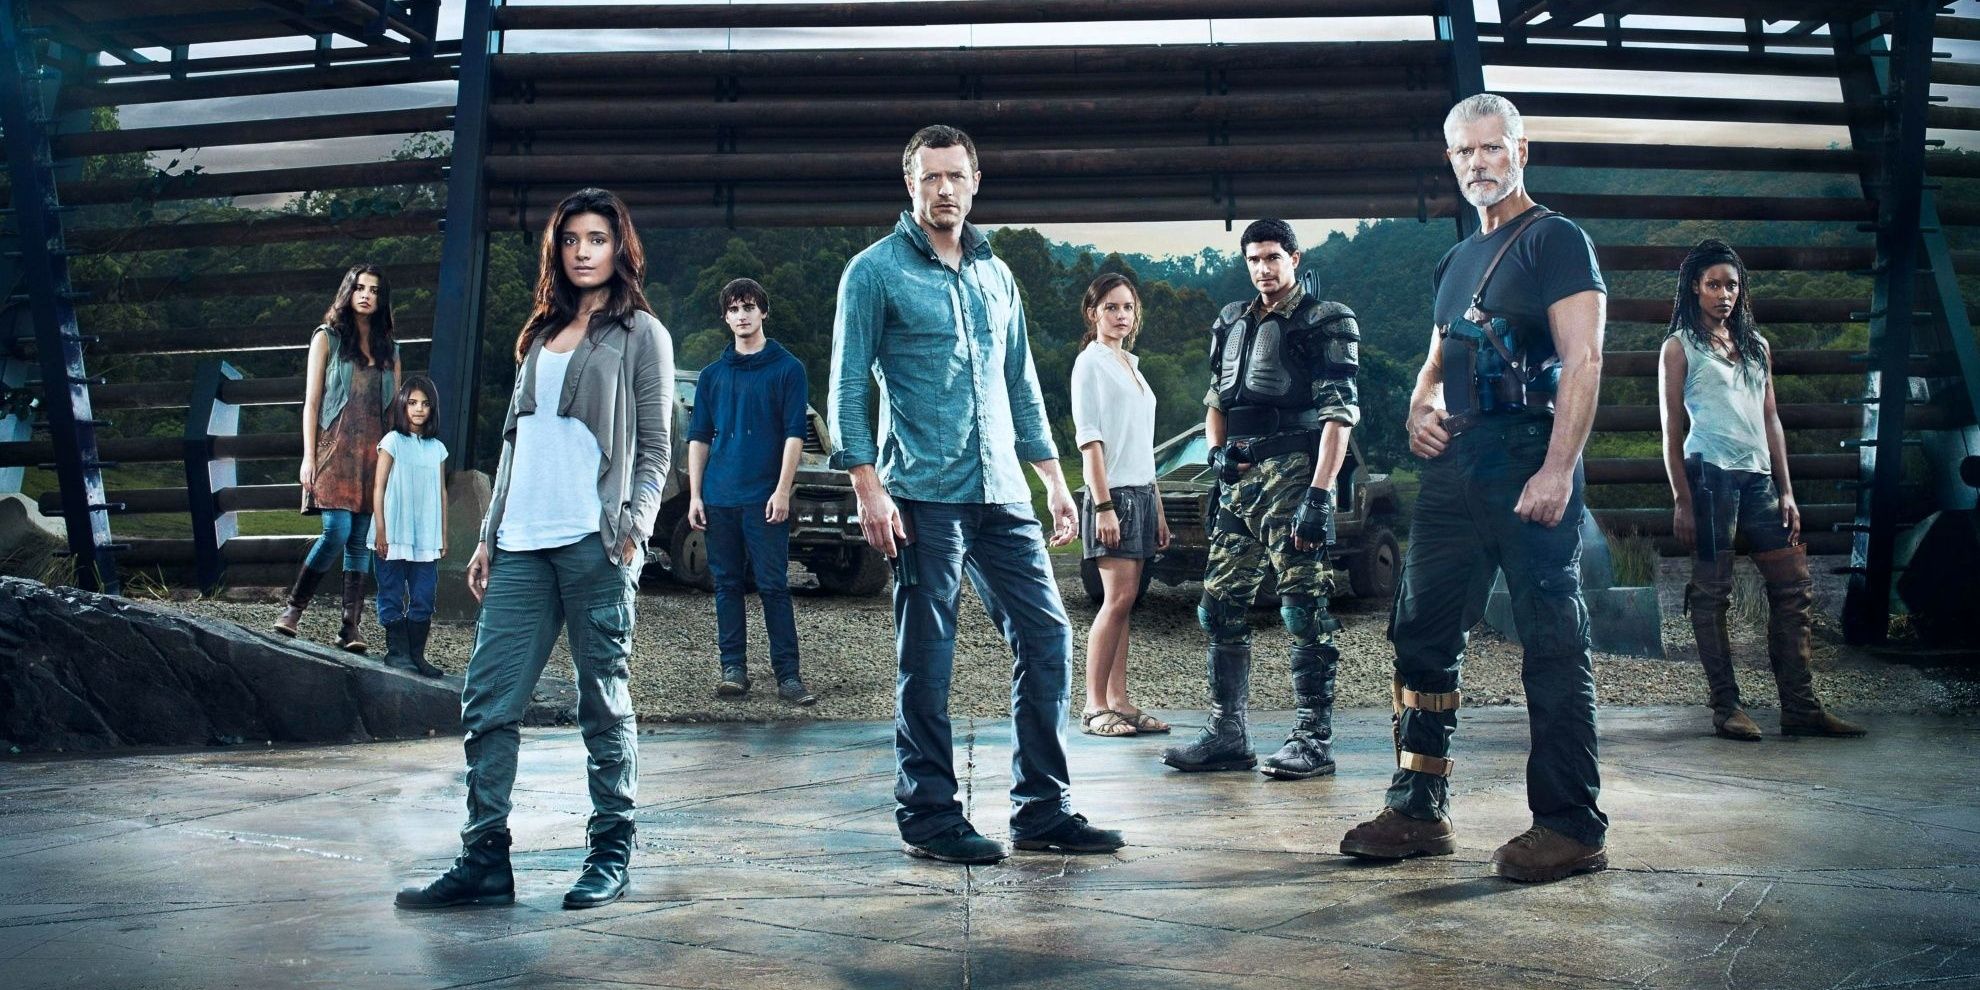 The cast of Terra Nova pose in front of gates